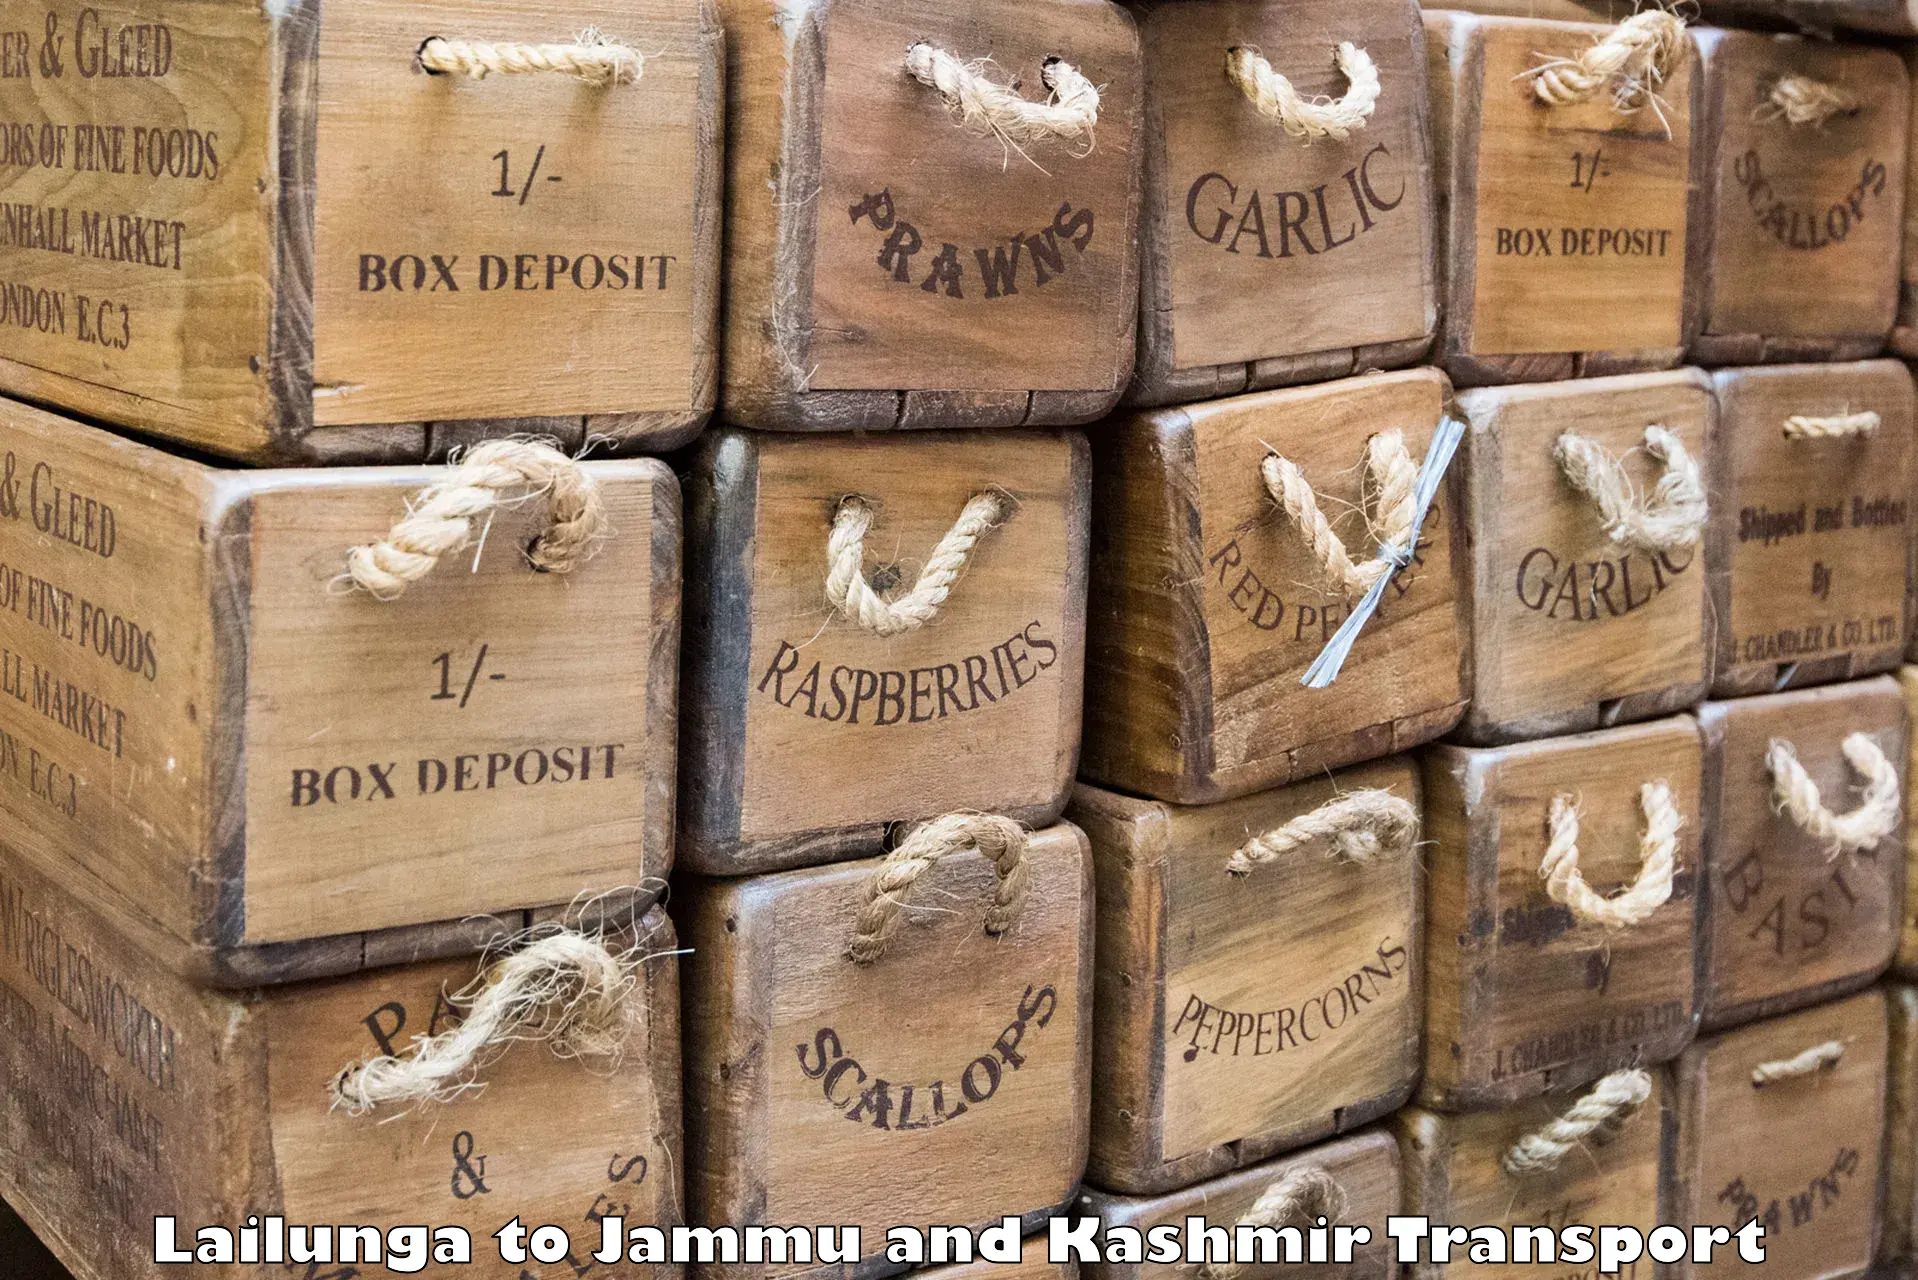 Daily parcel service transport Lailunga to Baramulla